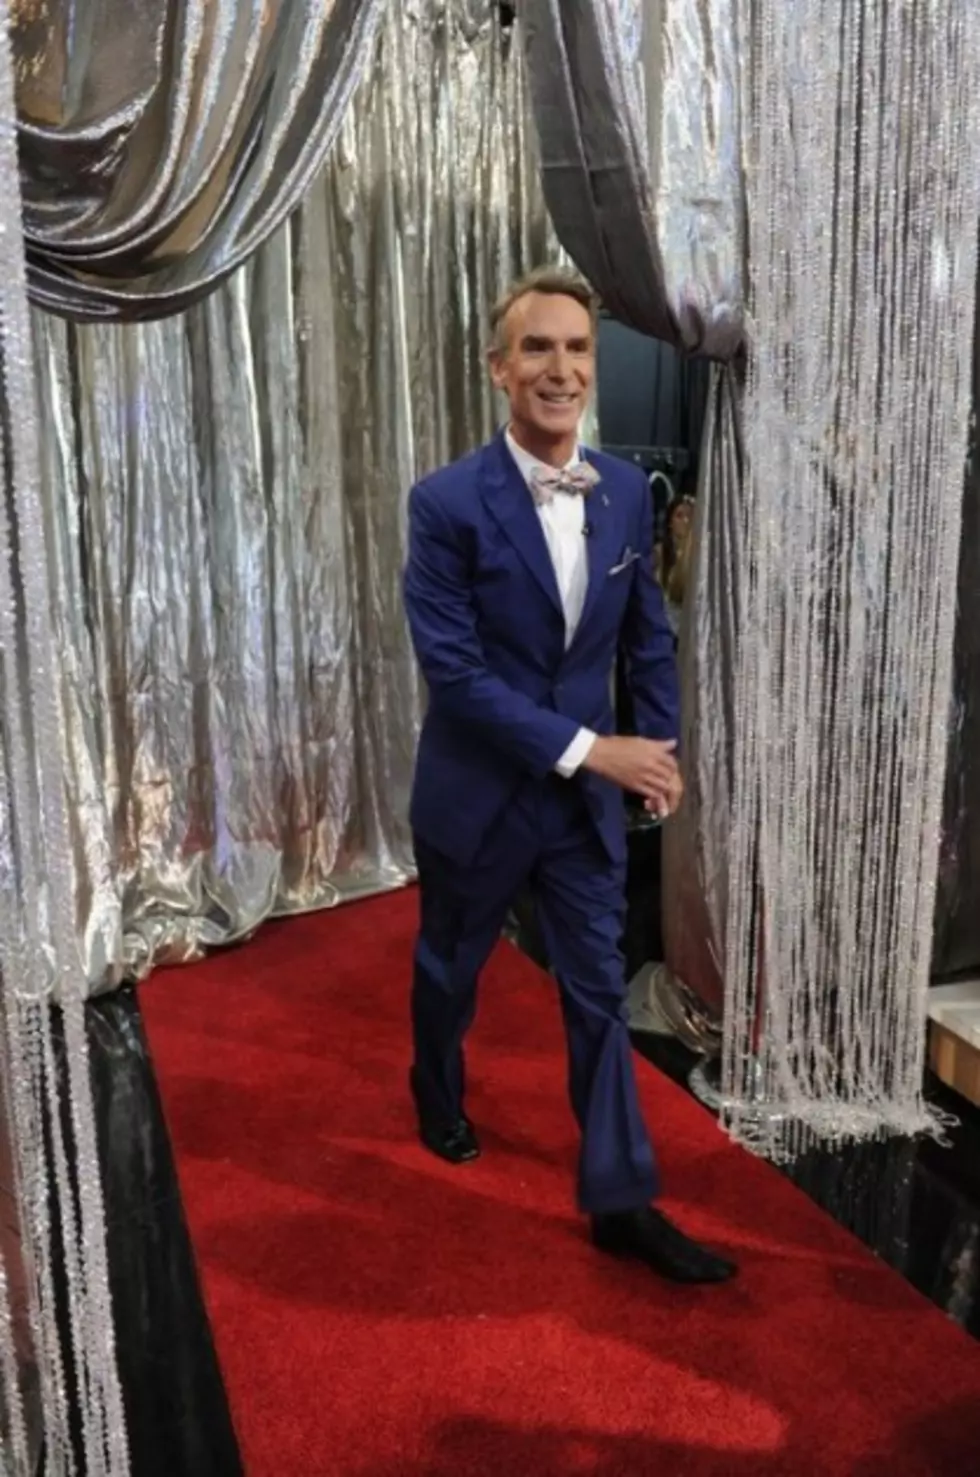 &#8220;Dancing With the Stars&#8221; &#8211; Bill Nye Has to Go